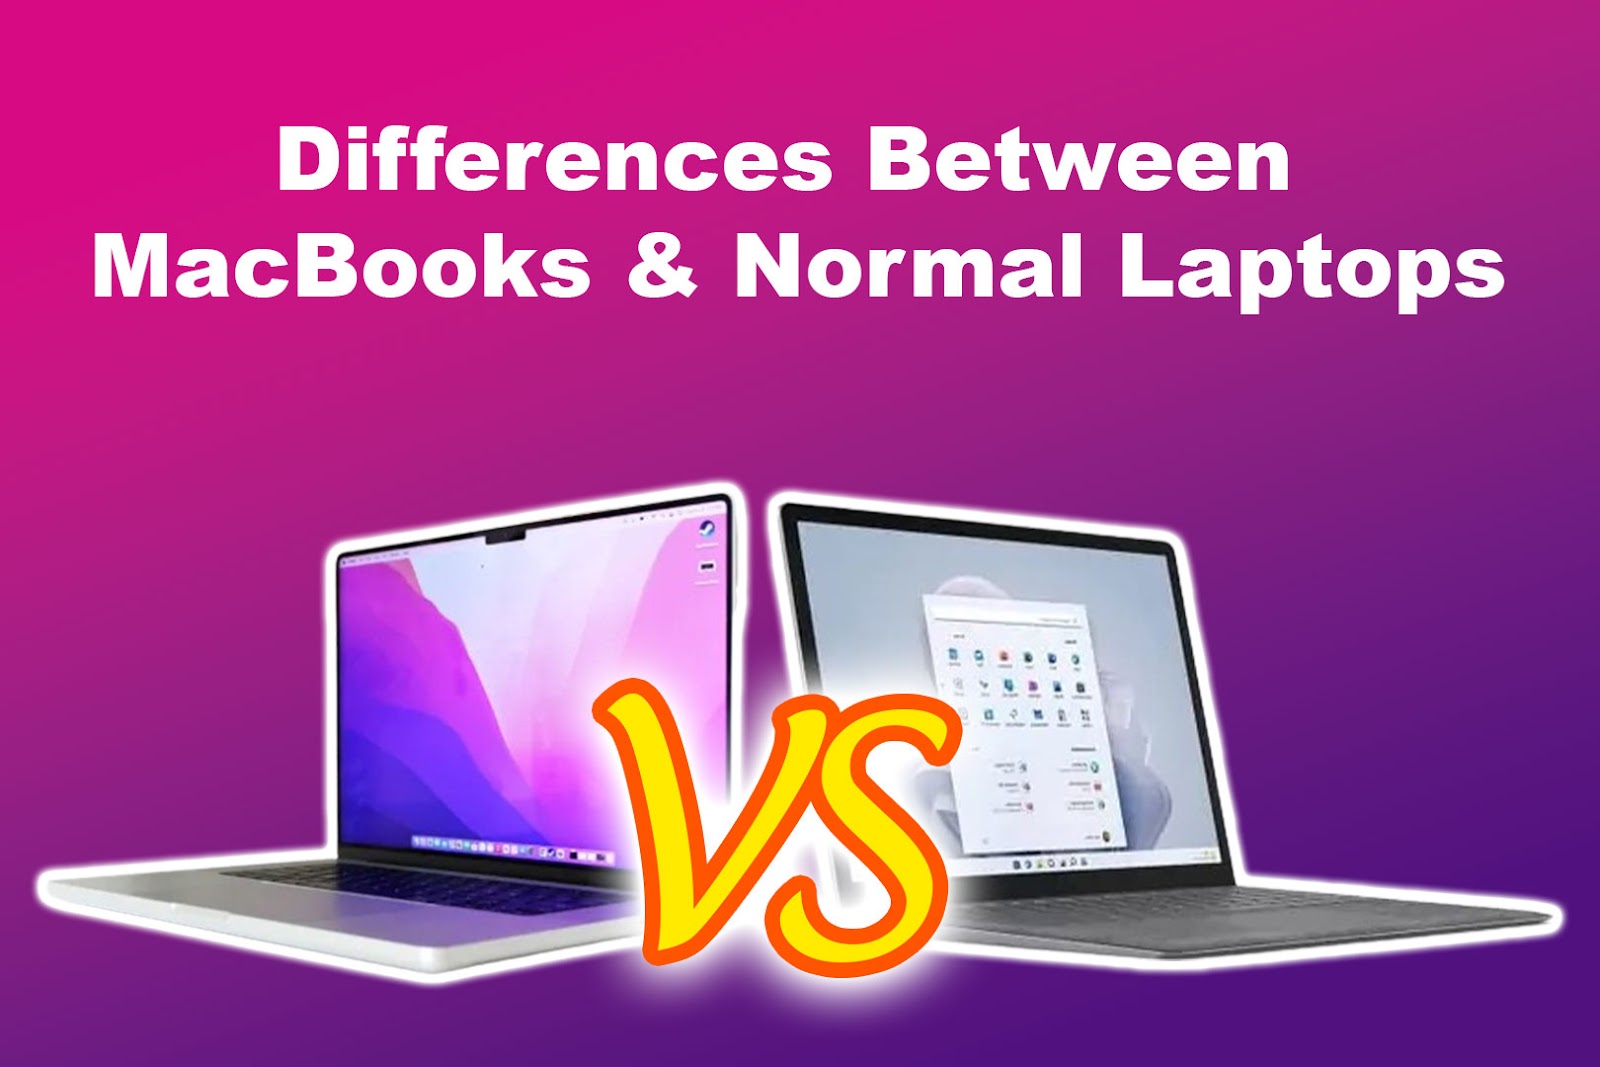 Differences Between MacBooks and Normal Laptops